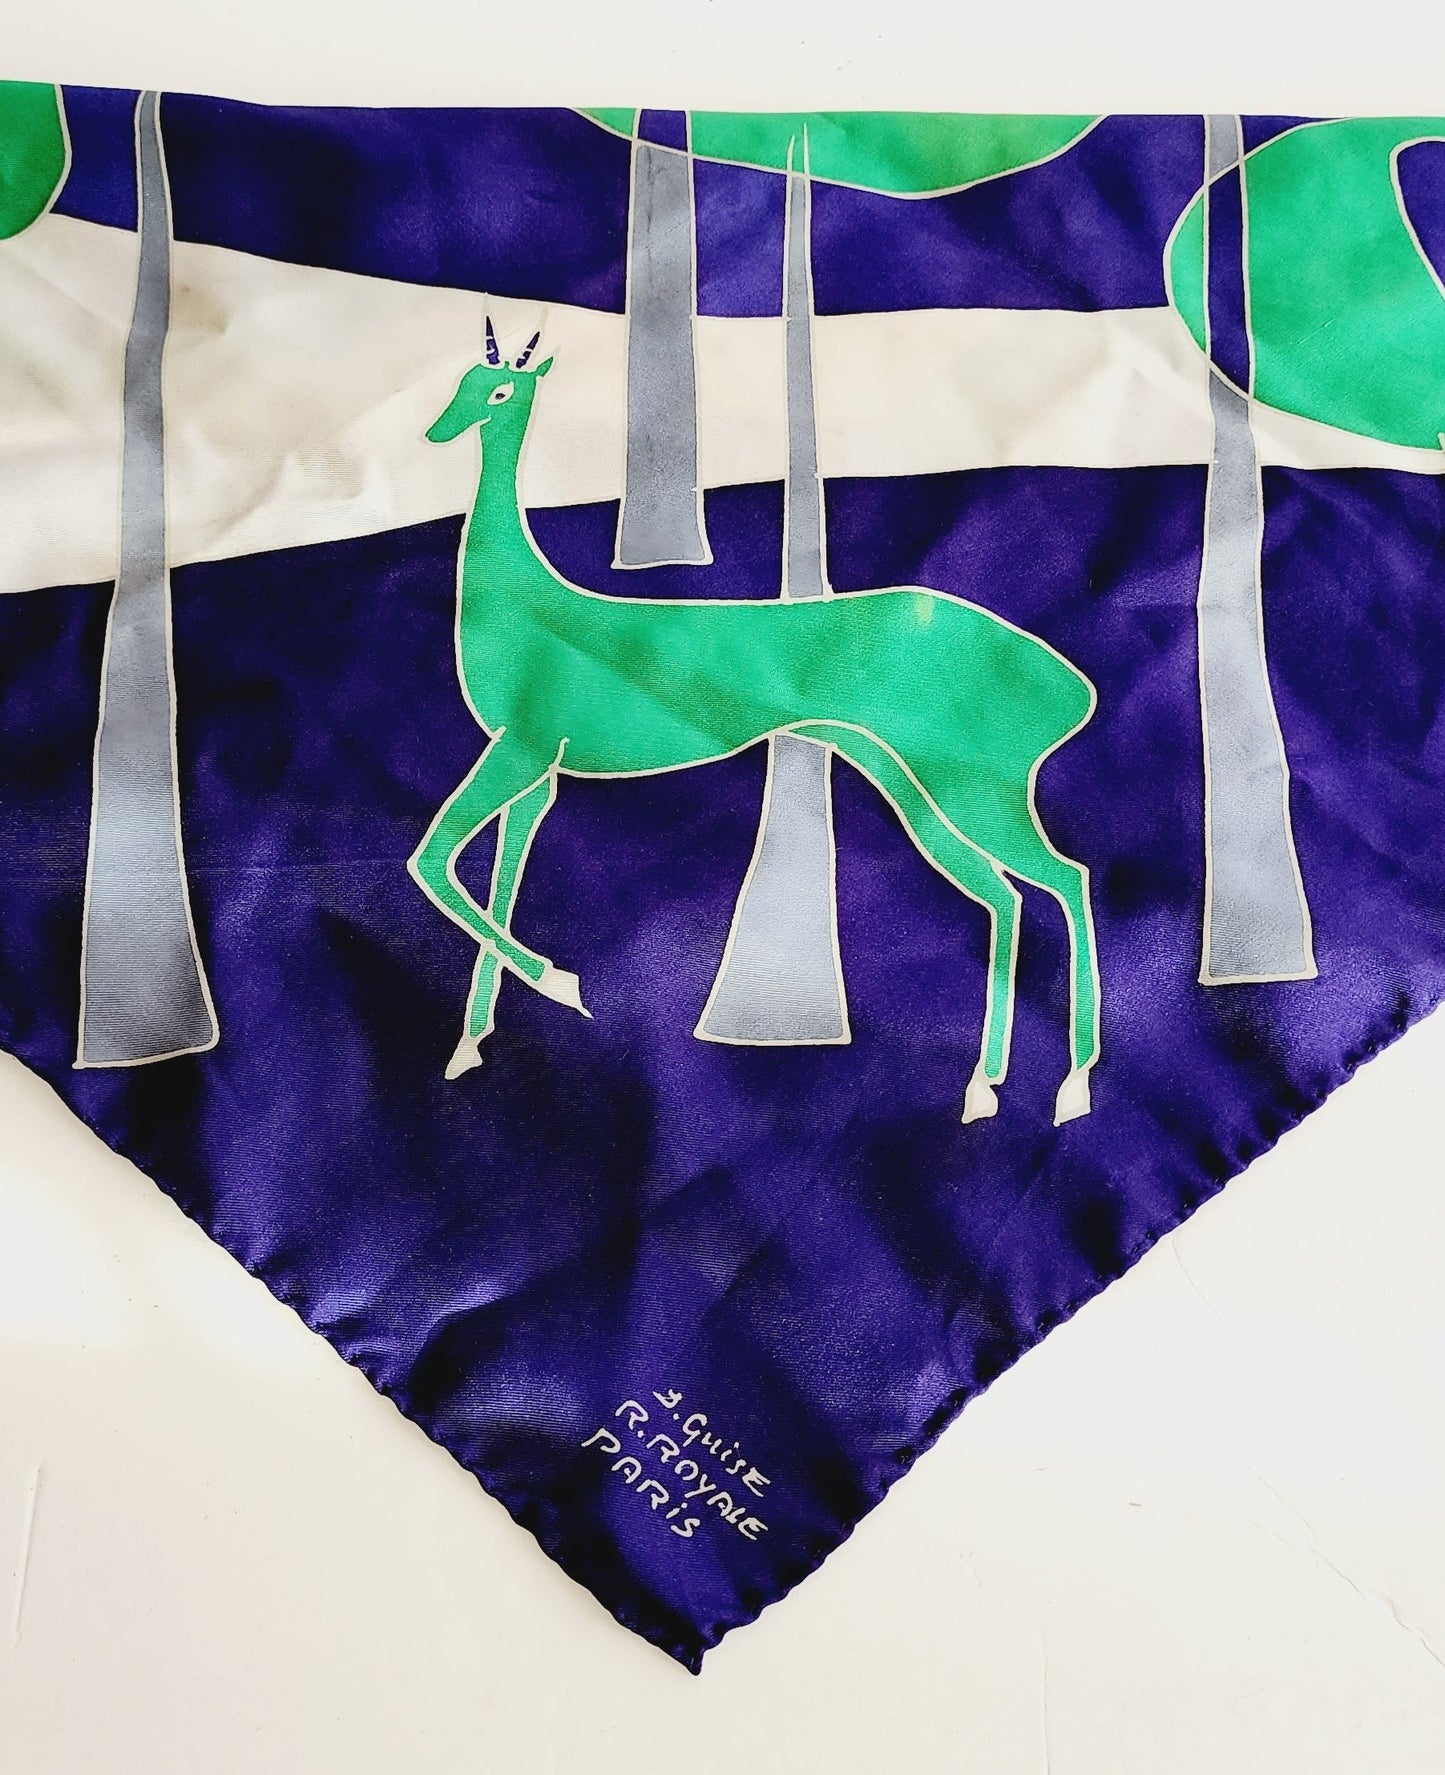 70s Scarf Modernist Print Gazelle in the Woods Green Navy Blue White J Guise Royale Paris